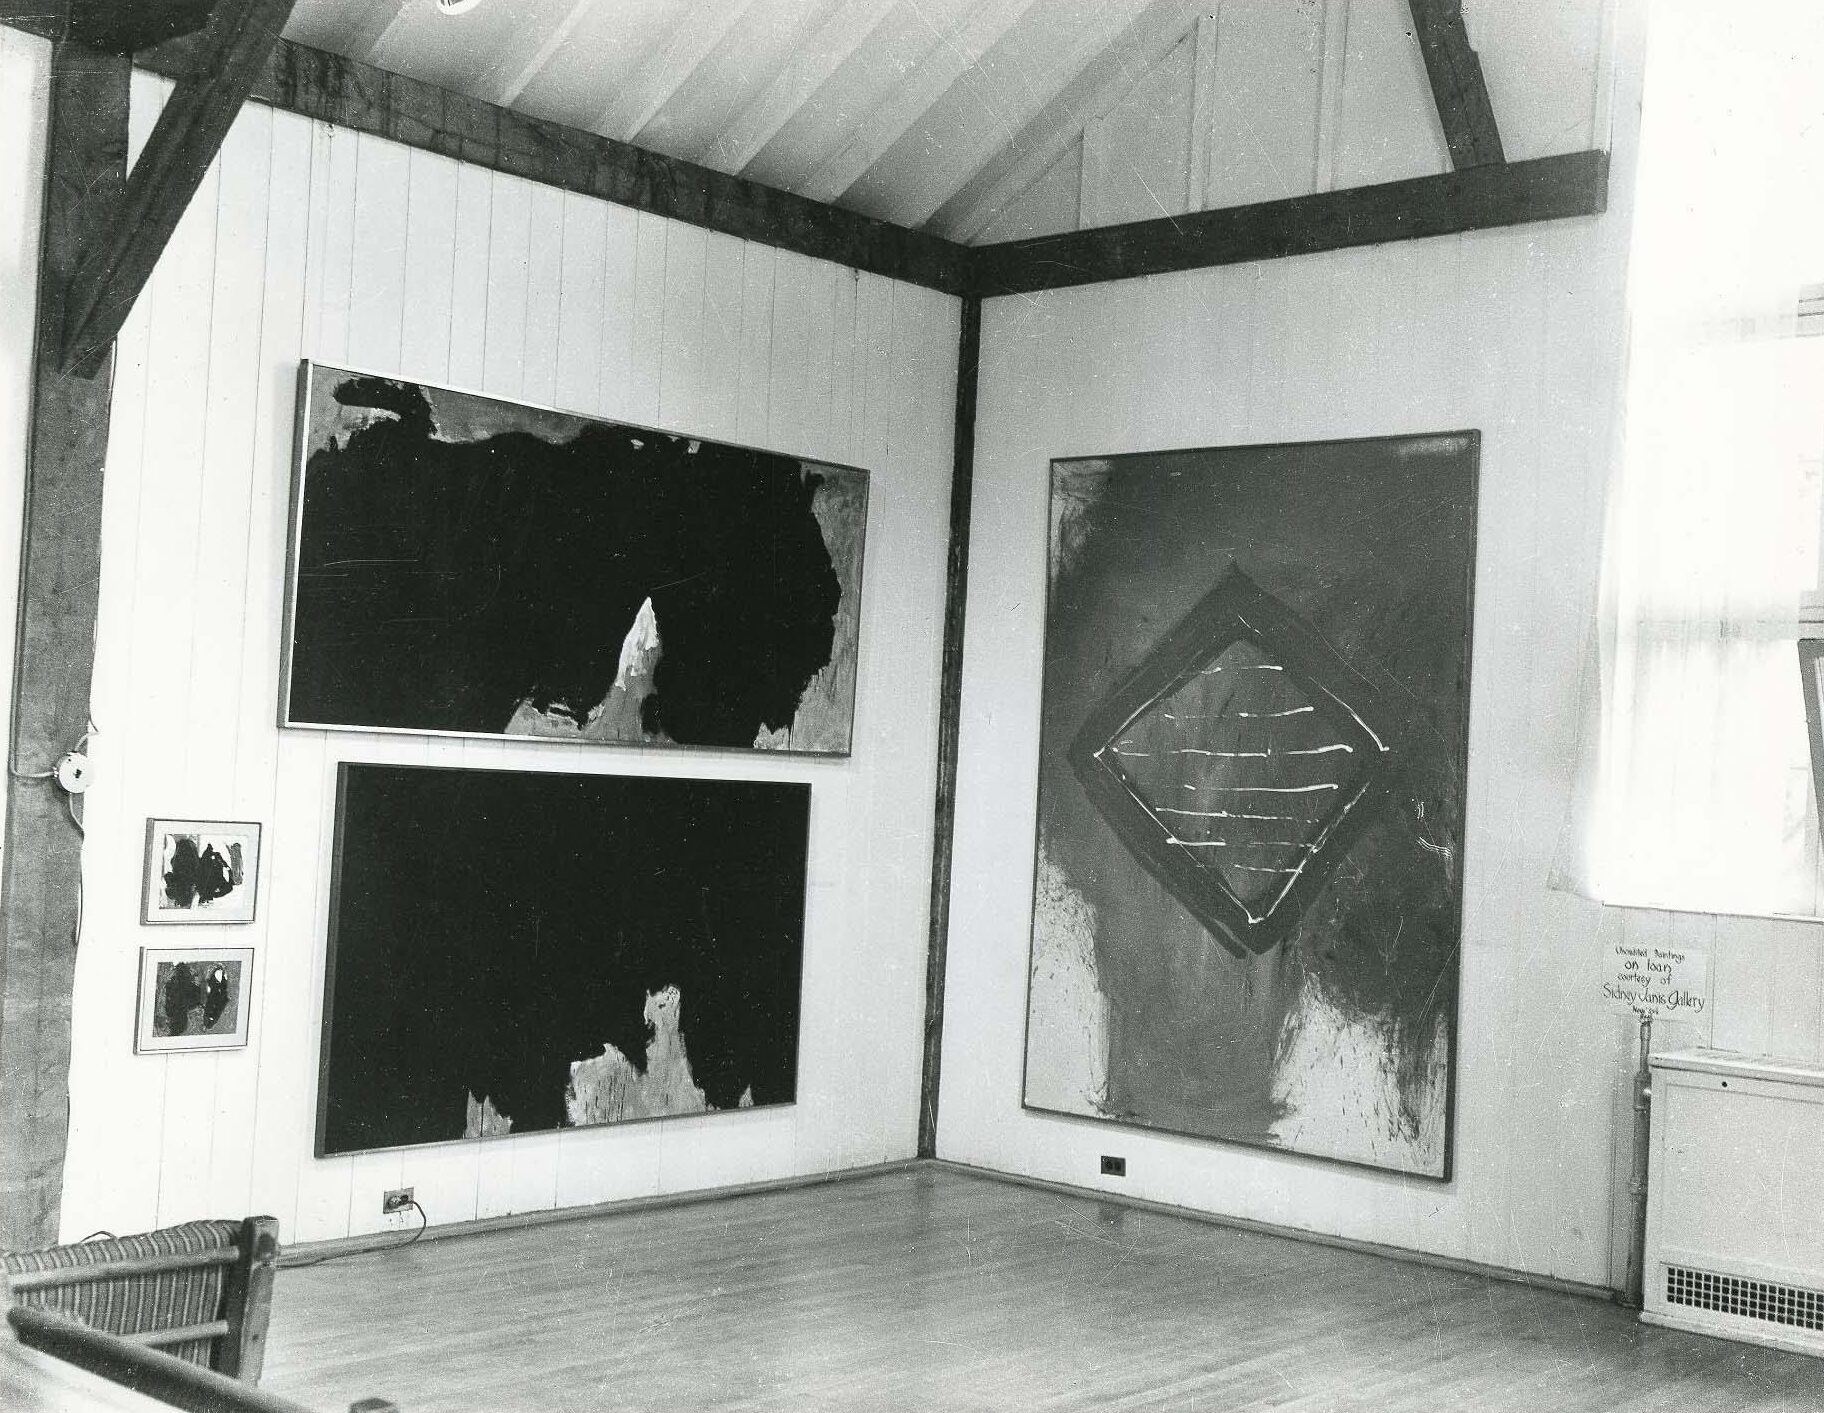 Installation view of Robert Motherwell: First Retrospective Exhibition, at the New Gallery, Bennington College, Vt. From left to right: Iberia No. 2, Iberia No. 4, and an early state of Summertime in Italy No. 8